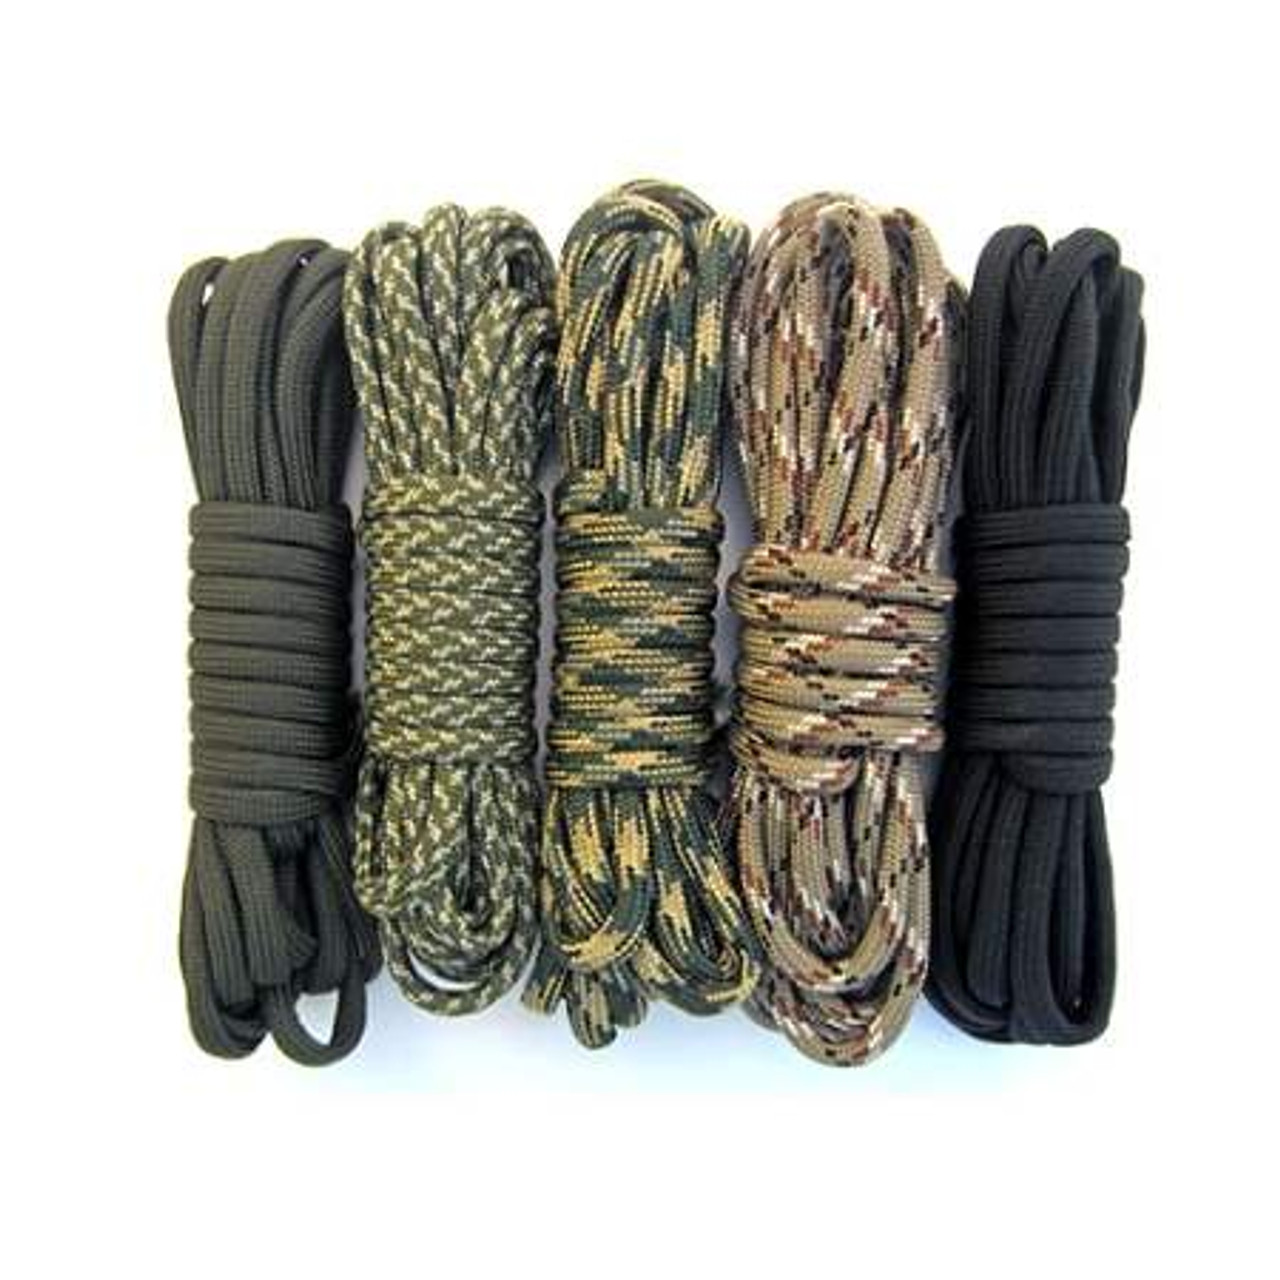 Lone Camo - Combo Kit (50'-550 Paracord) | Paracord Planet